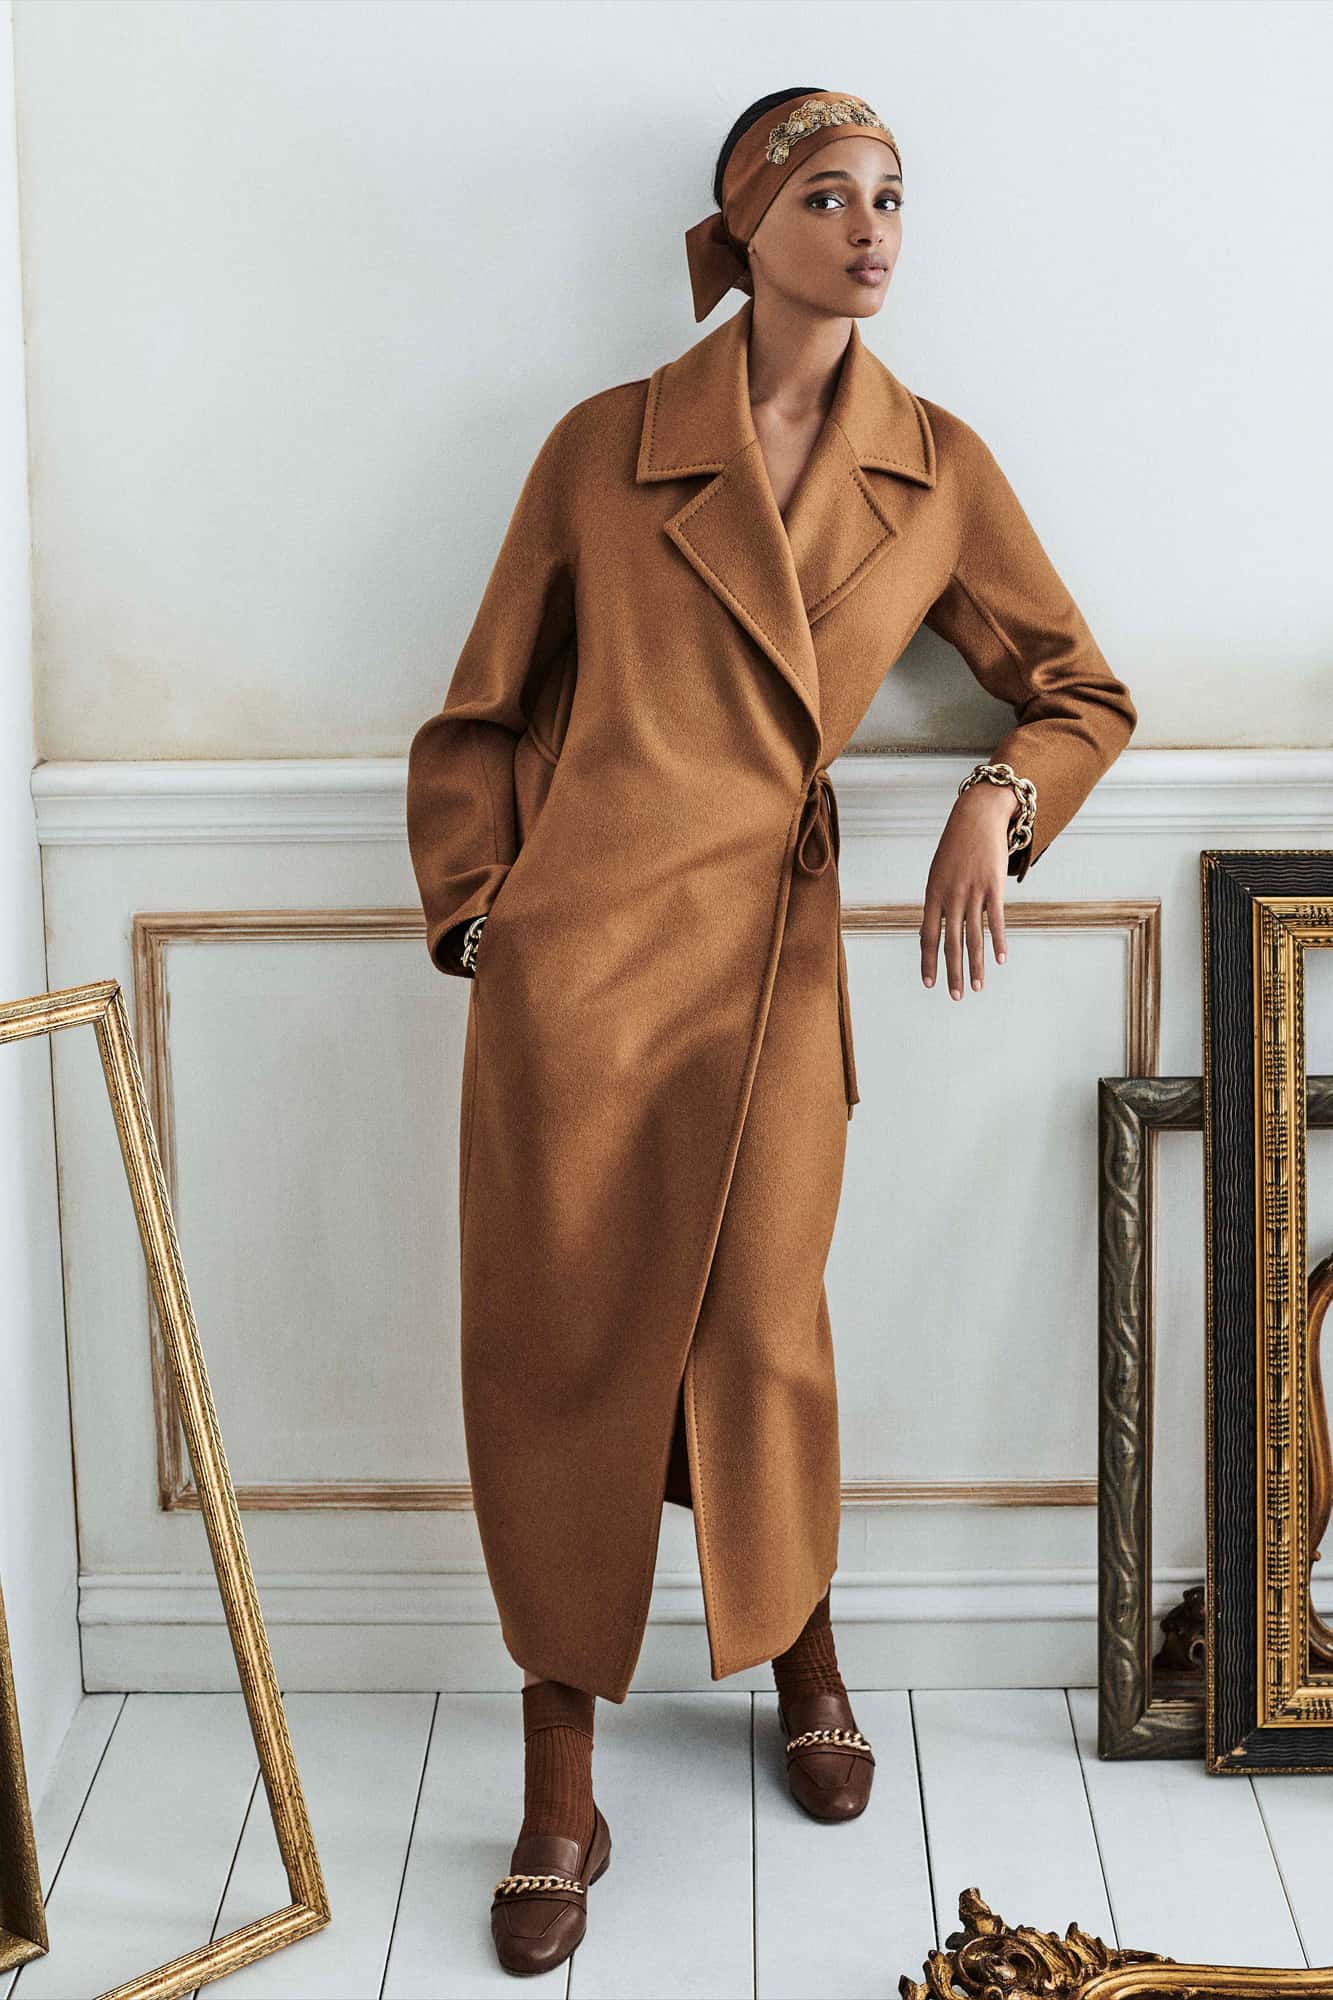 Lookbook: Max Mara's Resort 2021 Collection - Daily Front Row